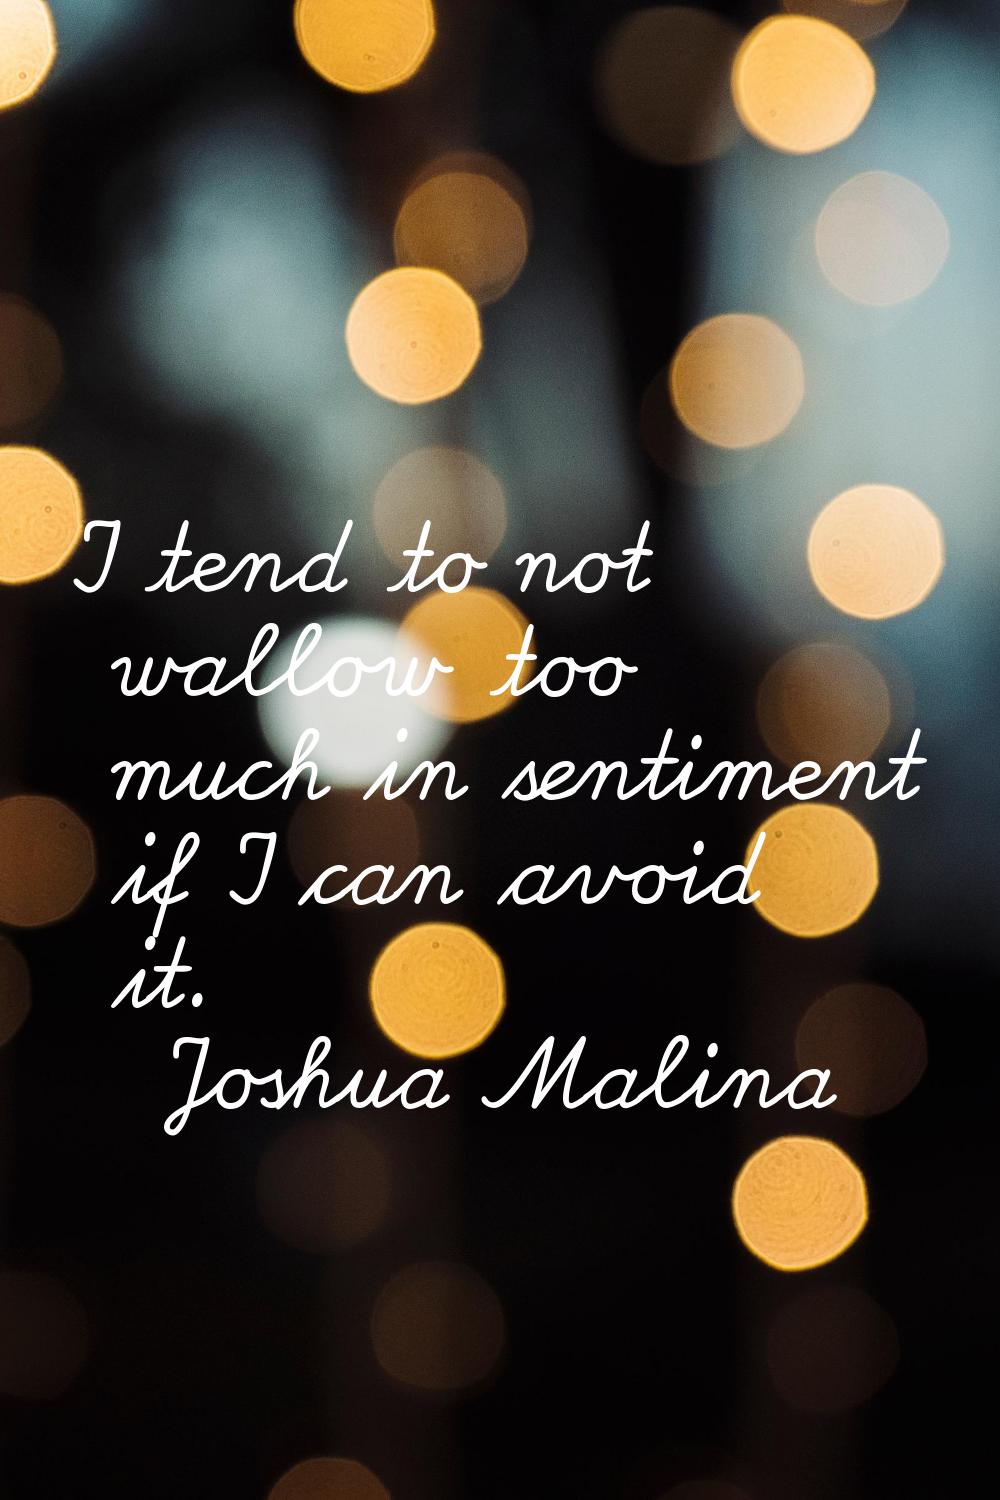 I tend to not wallow too much in sentiment if I can avoid it.